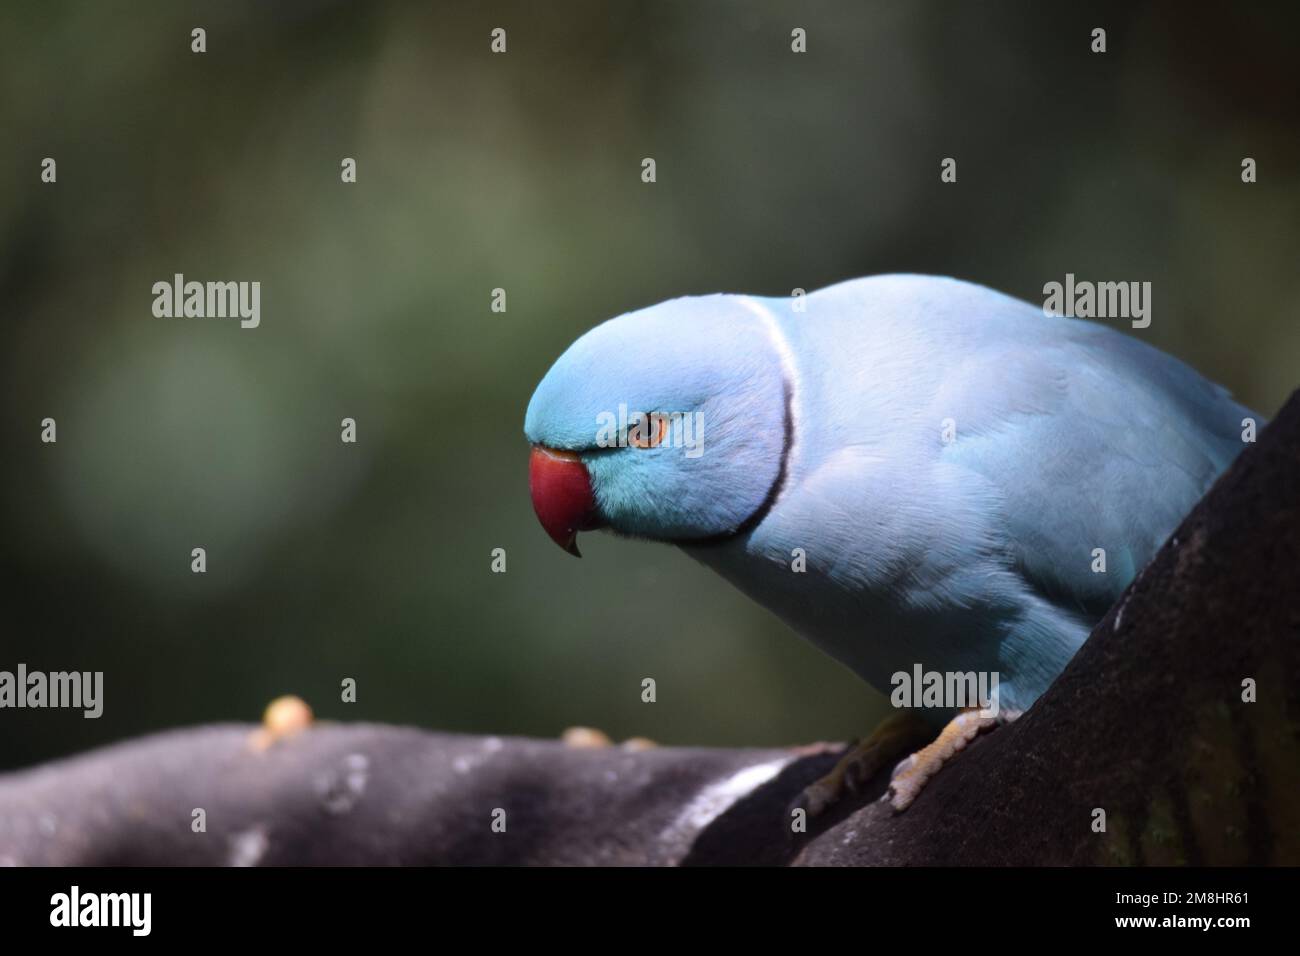 Blue Indian Ringneck parakeet, a colorful variation from the often green bird which is found in Europe, Singapore and South India. Stock Photo